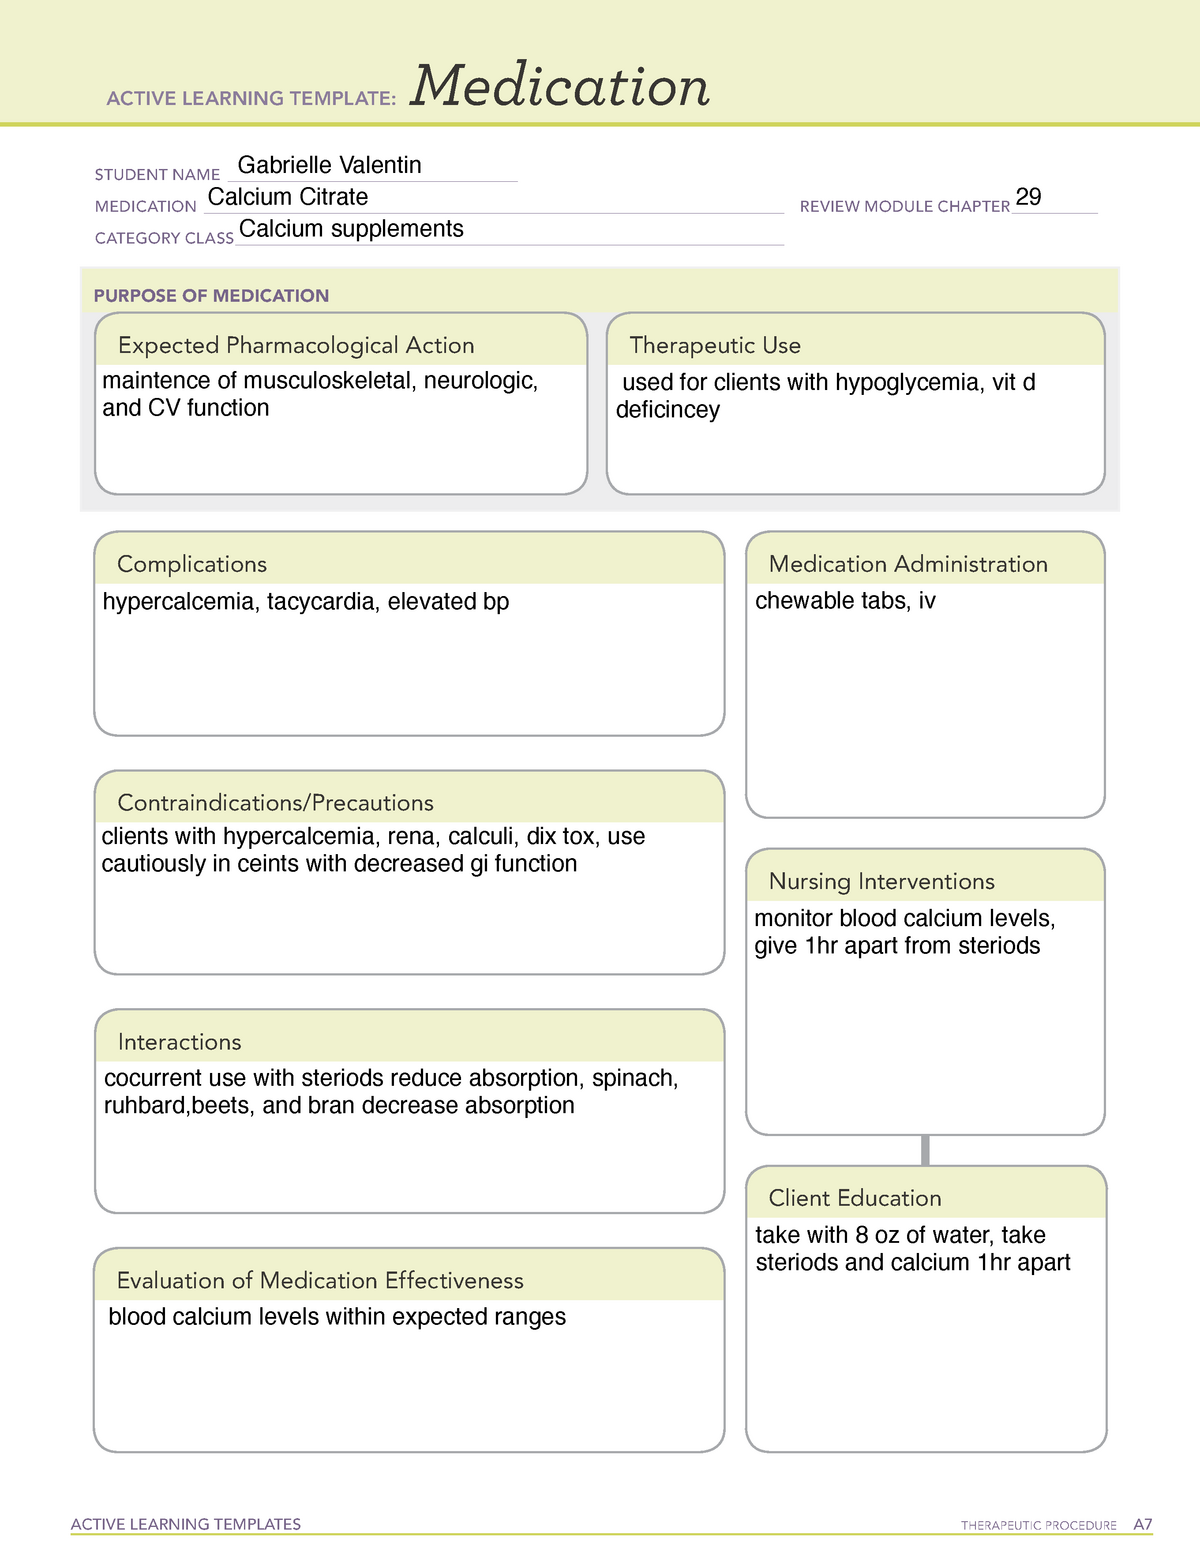 Medication Sheet Citrocal ACTIVE LEARNING TEMPLATES THERAPEUTIC